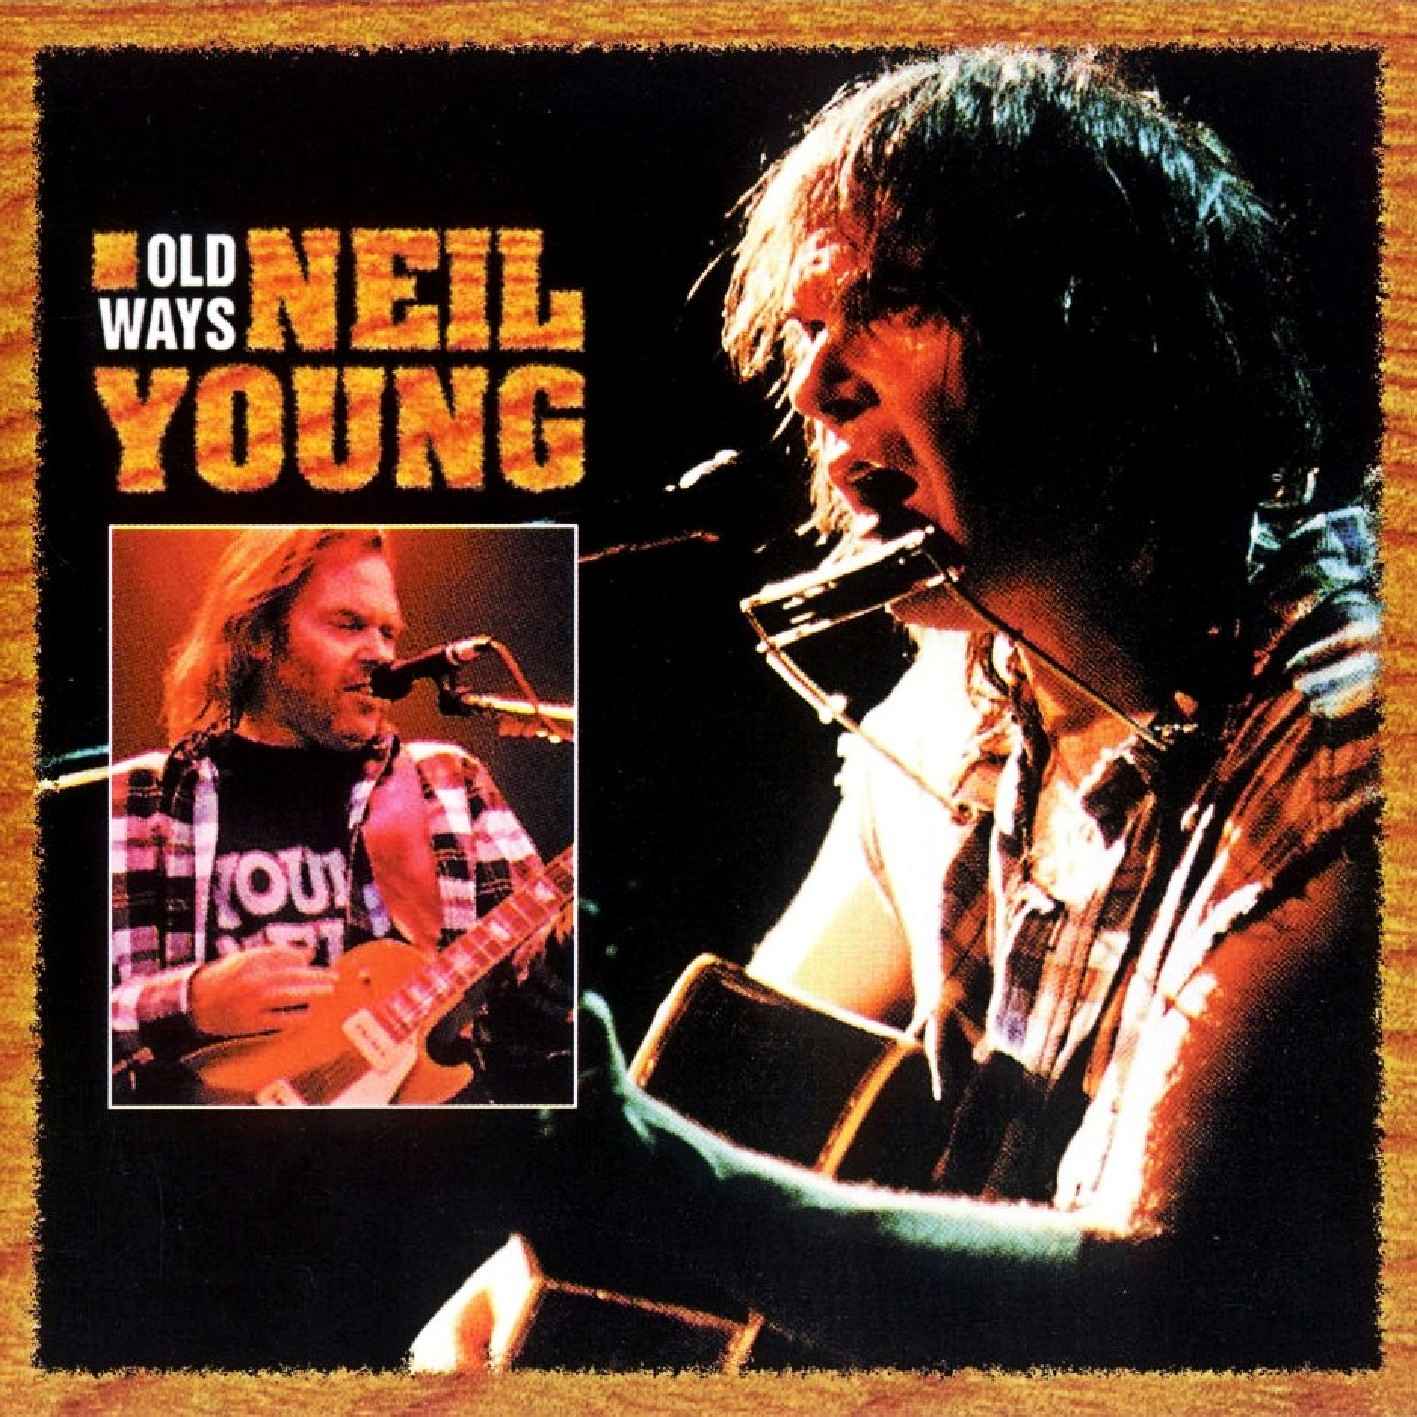 [neil.young.old.ways.1985.front.jpg]